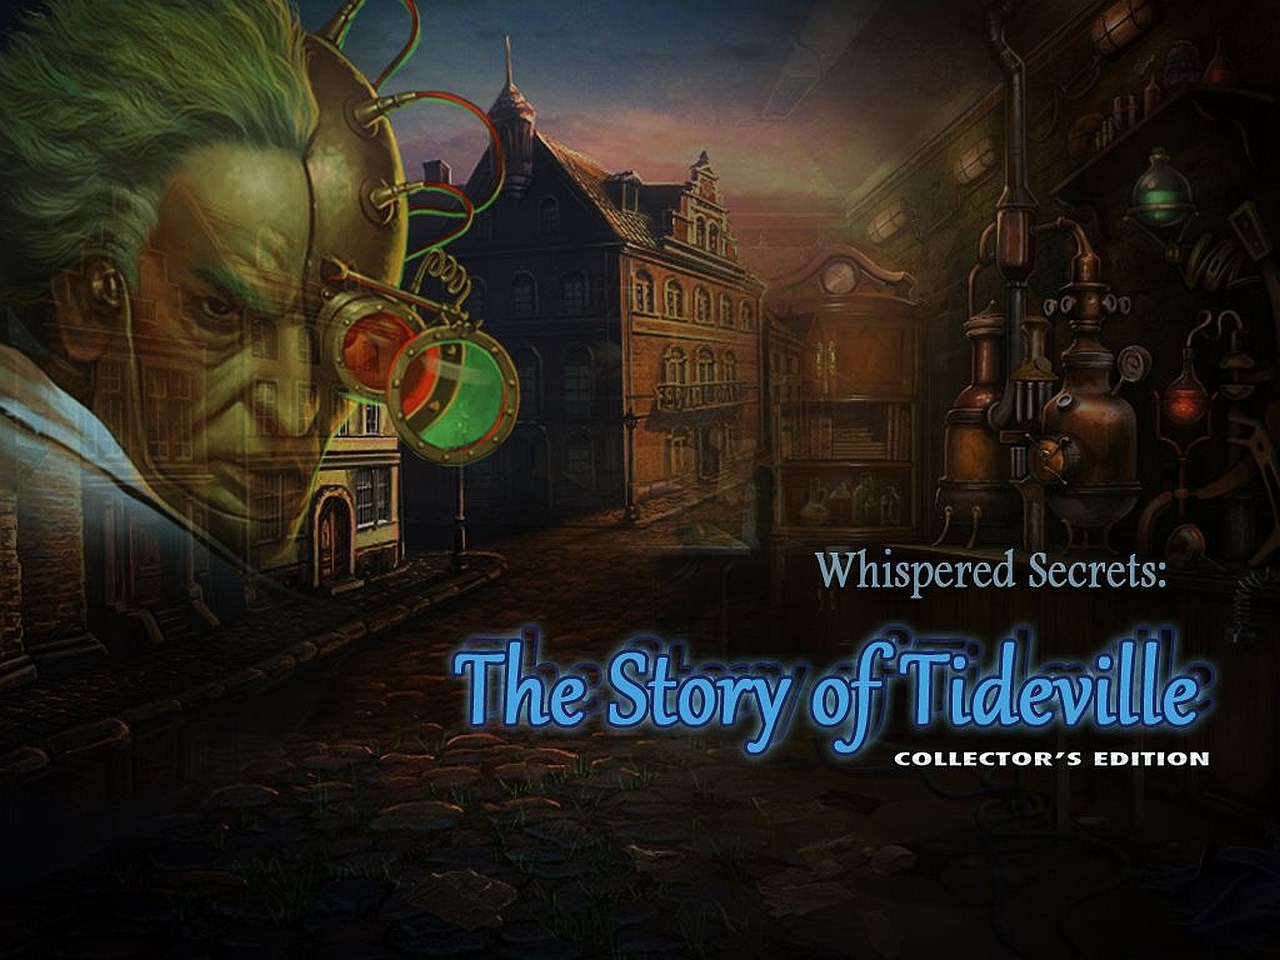 Whispered Secrets: The Story Of Tideville Backgrounds, Compatible - PC, Mobile, Gadgets| 1280x960 px